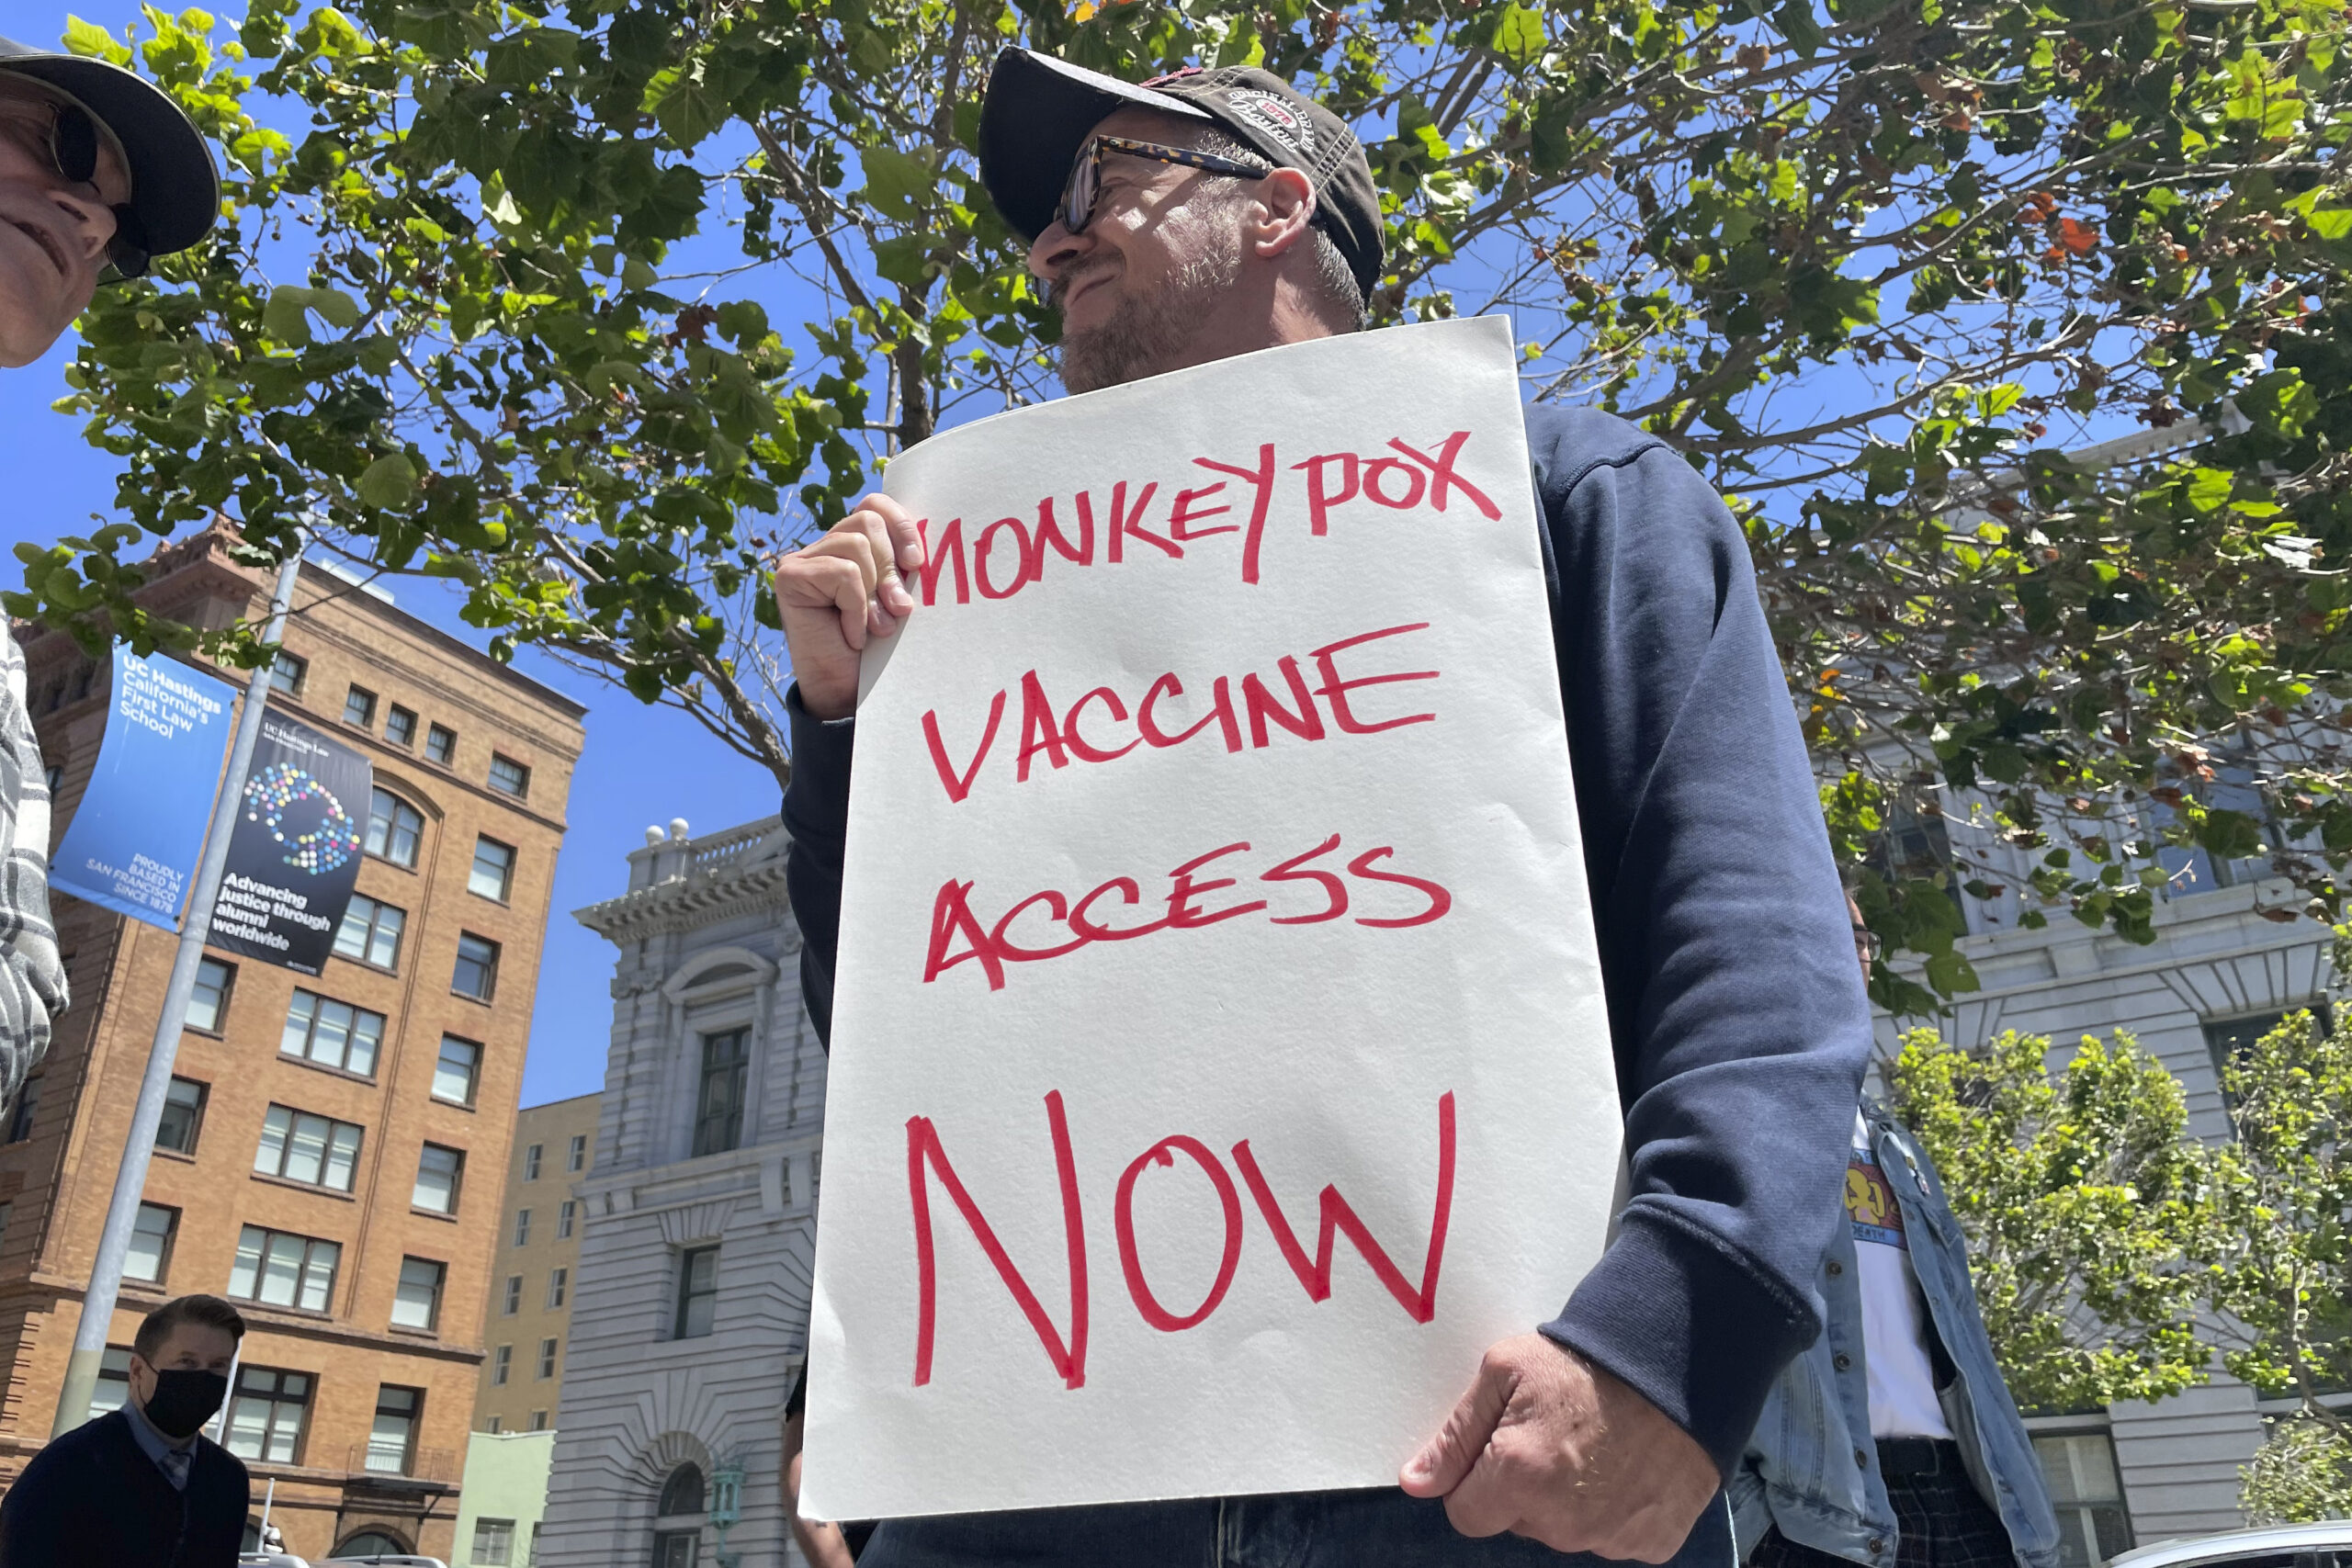 FILE - A man holds a sign urging increased access to the monkeypox vaccine during a protest in San Francisco, July 18, 2022. California's governor on Monday, Aug. 1, 2022, declared a state of emergency to speed efforts to combat the monkeypox outbreak, becoming the second state in three days to take the step. (AP Photo/Haven Daley, File)